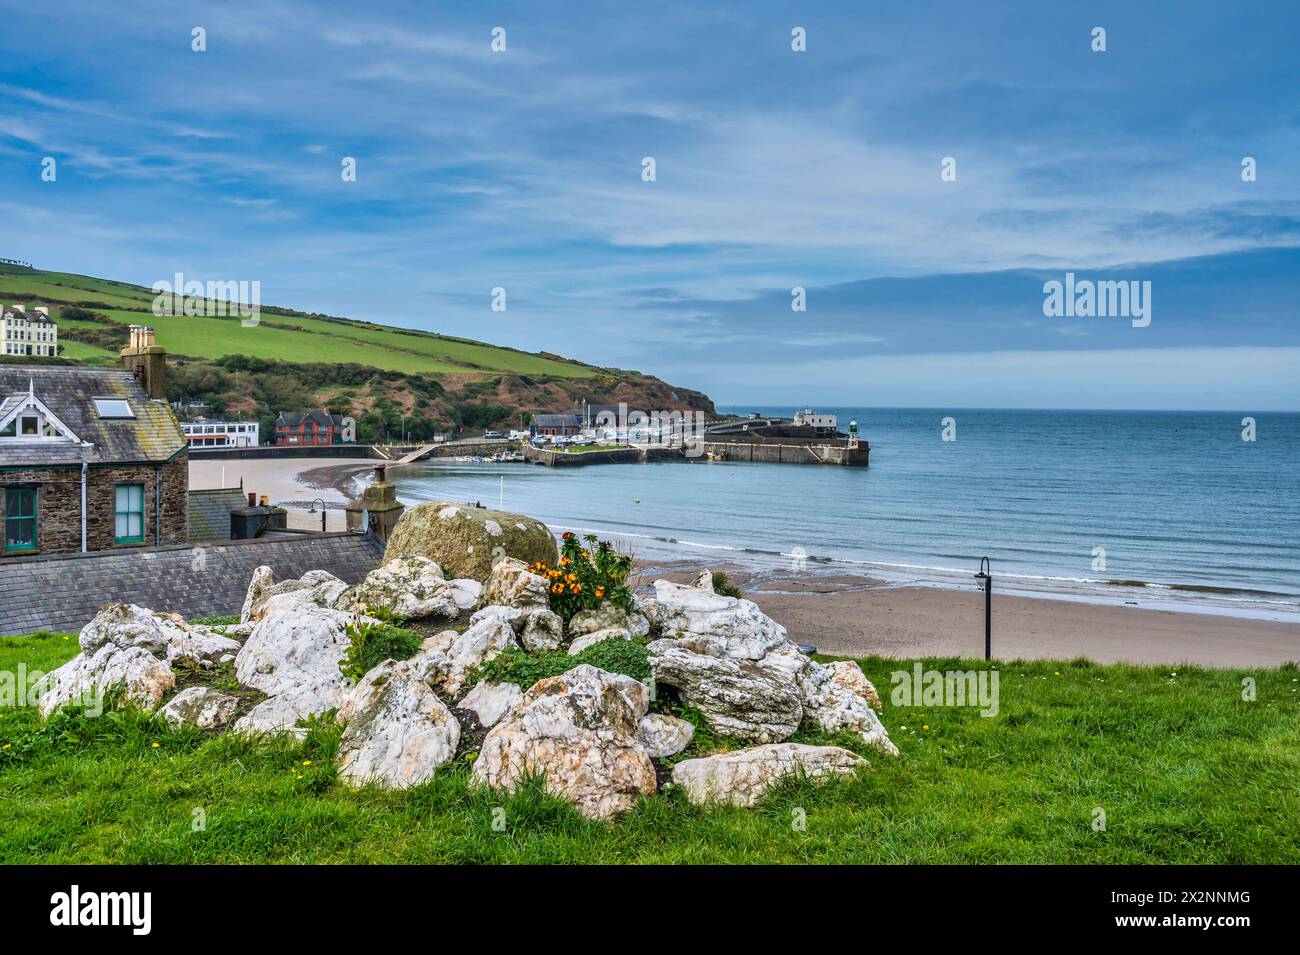 Scenic image looking across the bay towards the Irish Sea at the coastal resort town of Port Erin on the southwestern tip of the Isle of Man Stock Photo